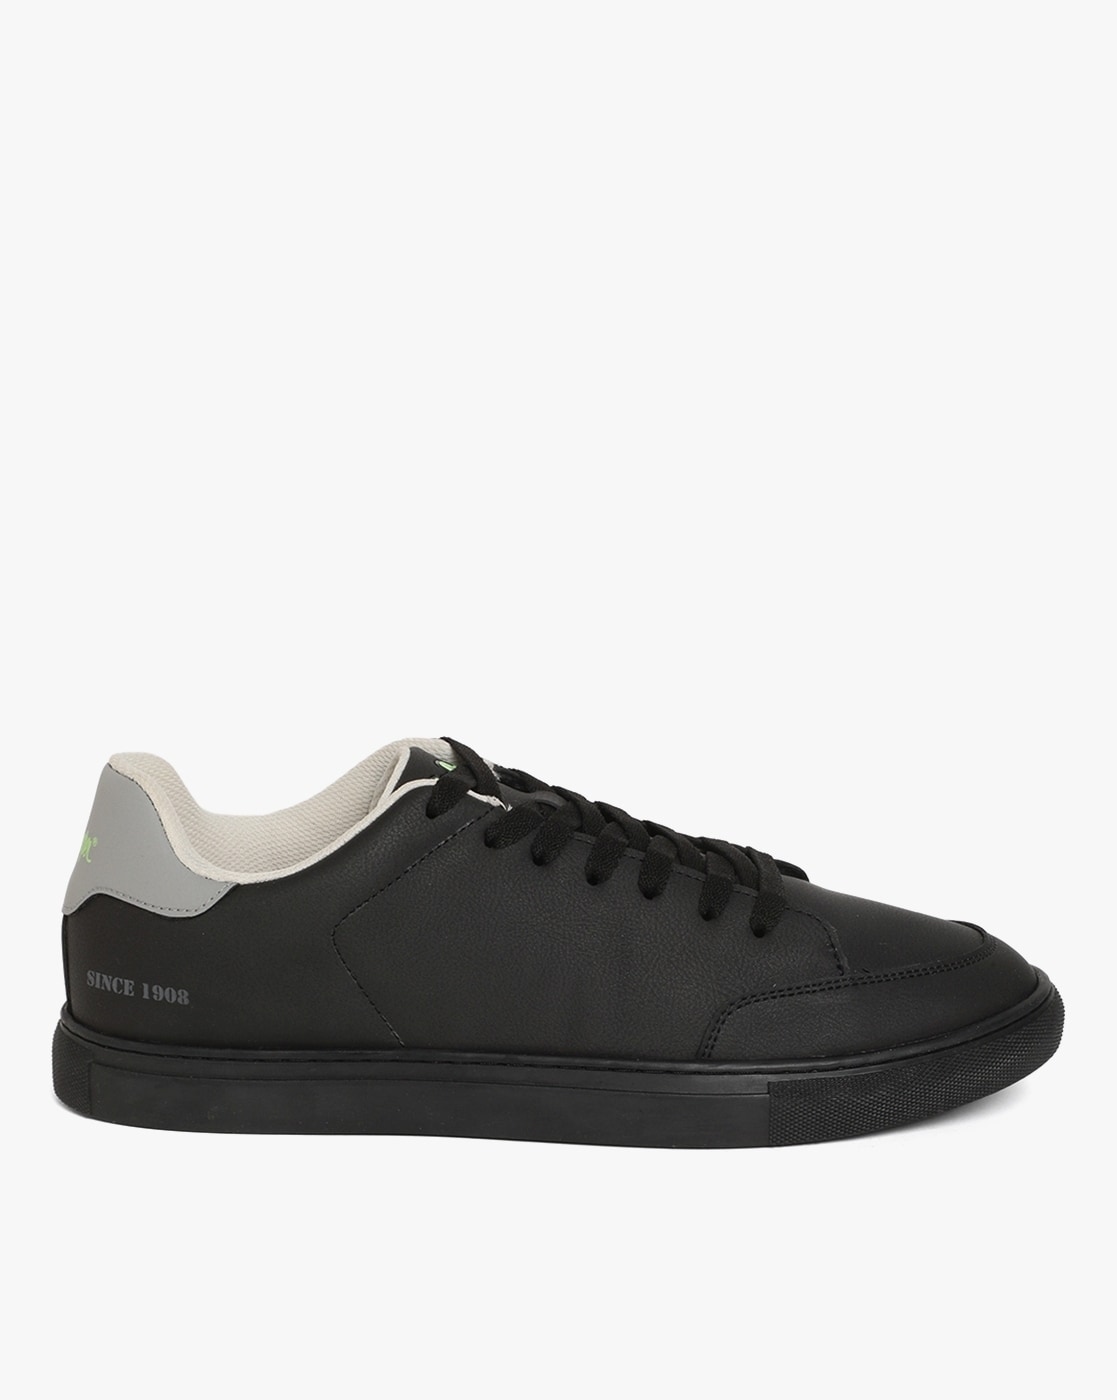 Lee Cooper Black Casual Shoes - Buy Lee Cooper Black Casual Shoes online in  India